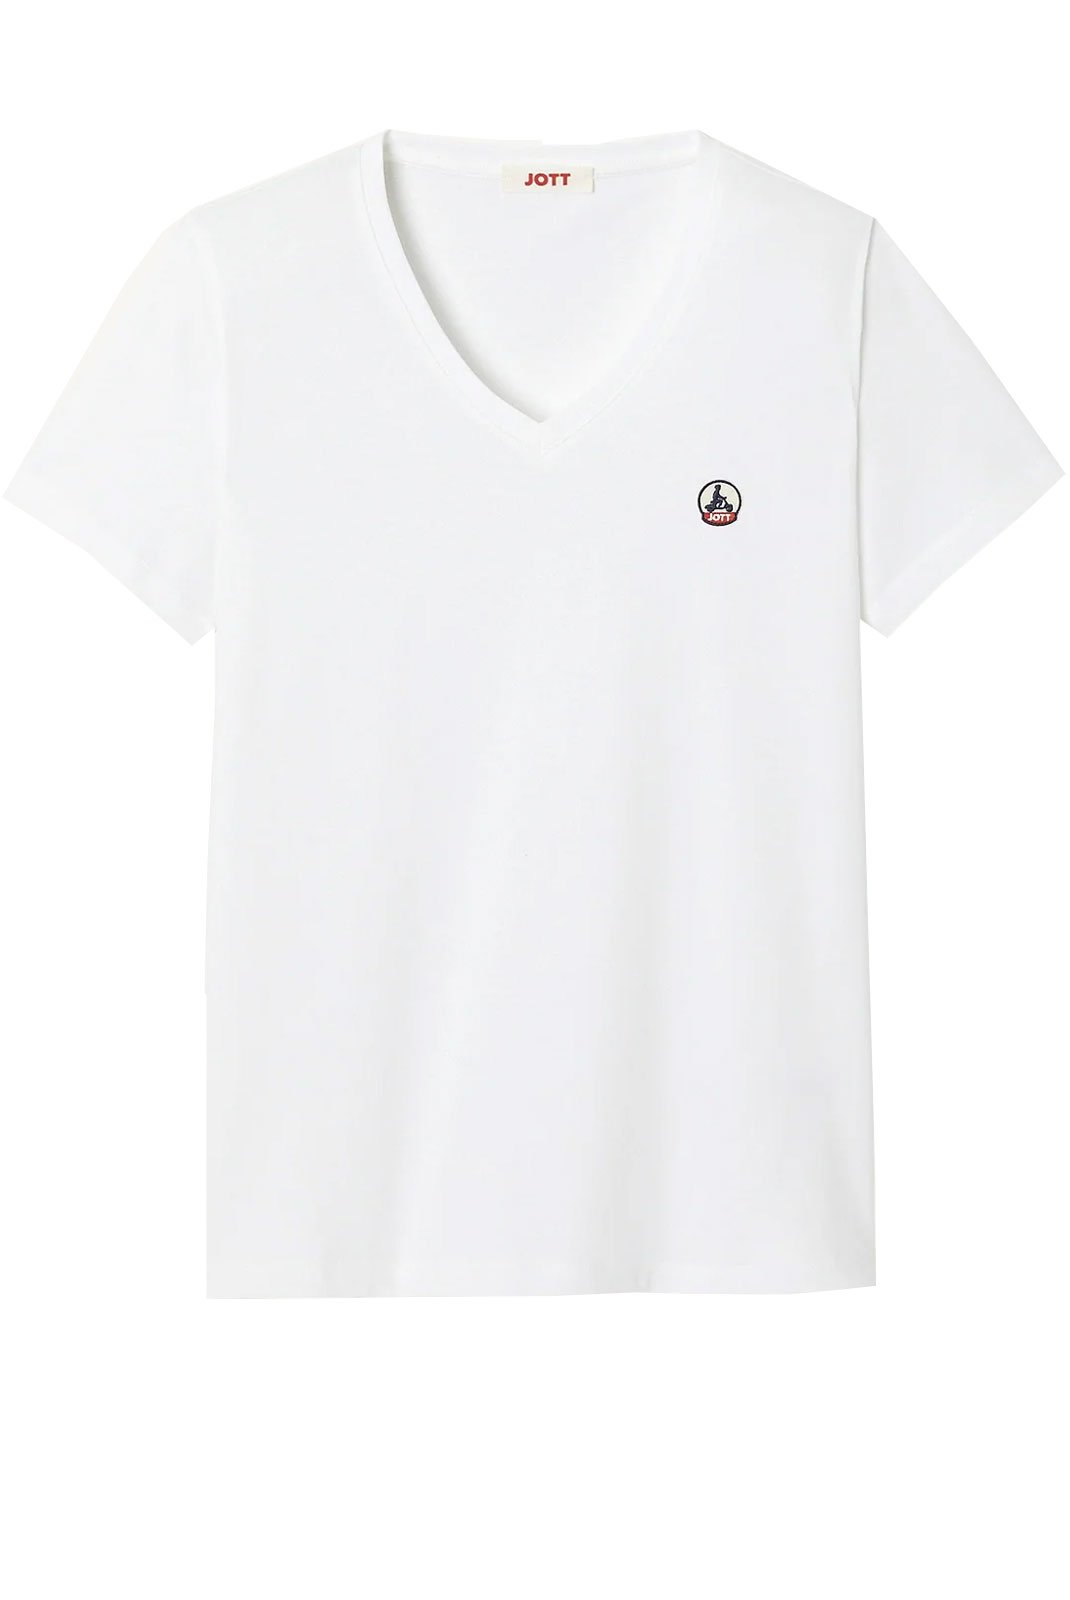 Tops & Tee shirts  Just over the top CANCUN 901 BLANC